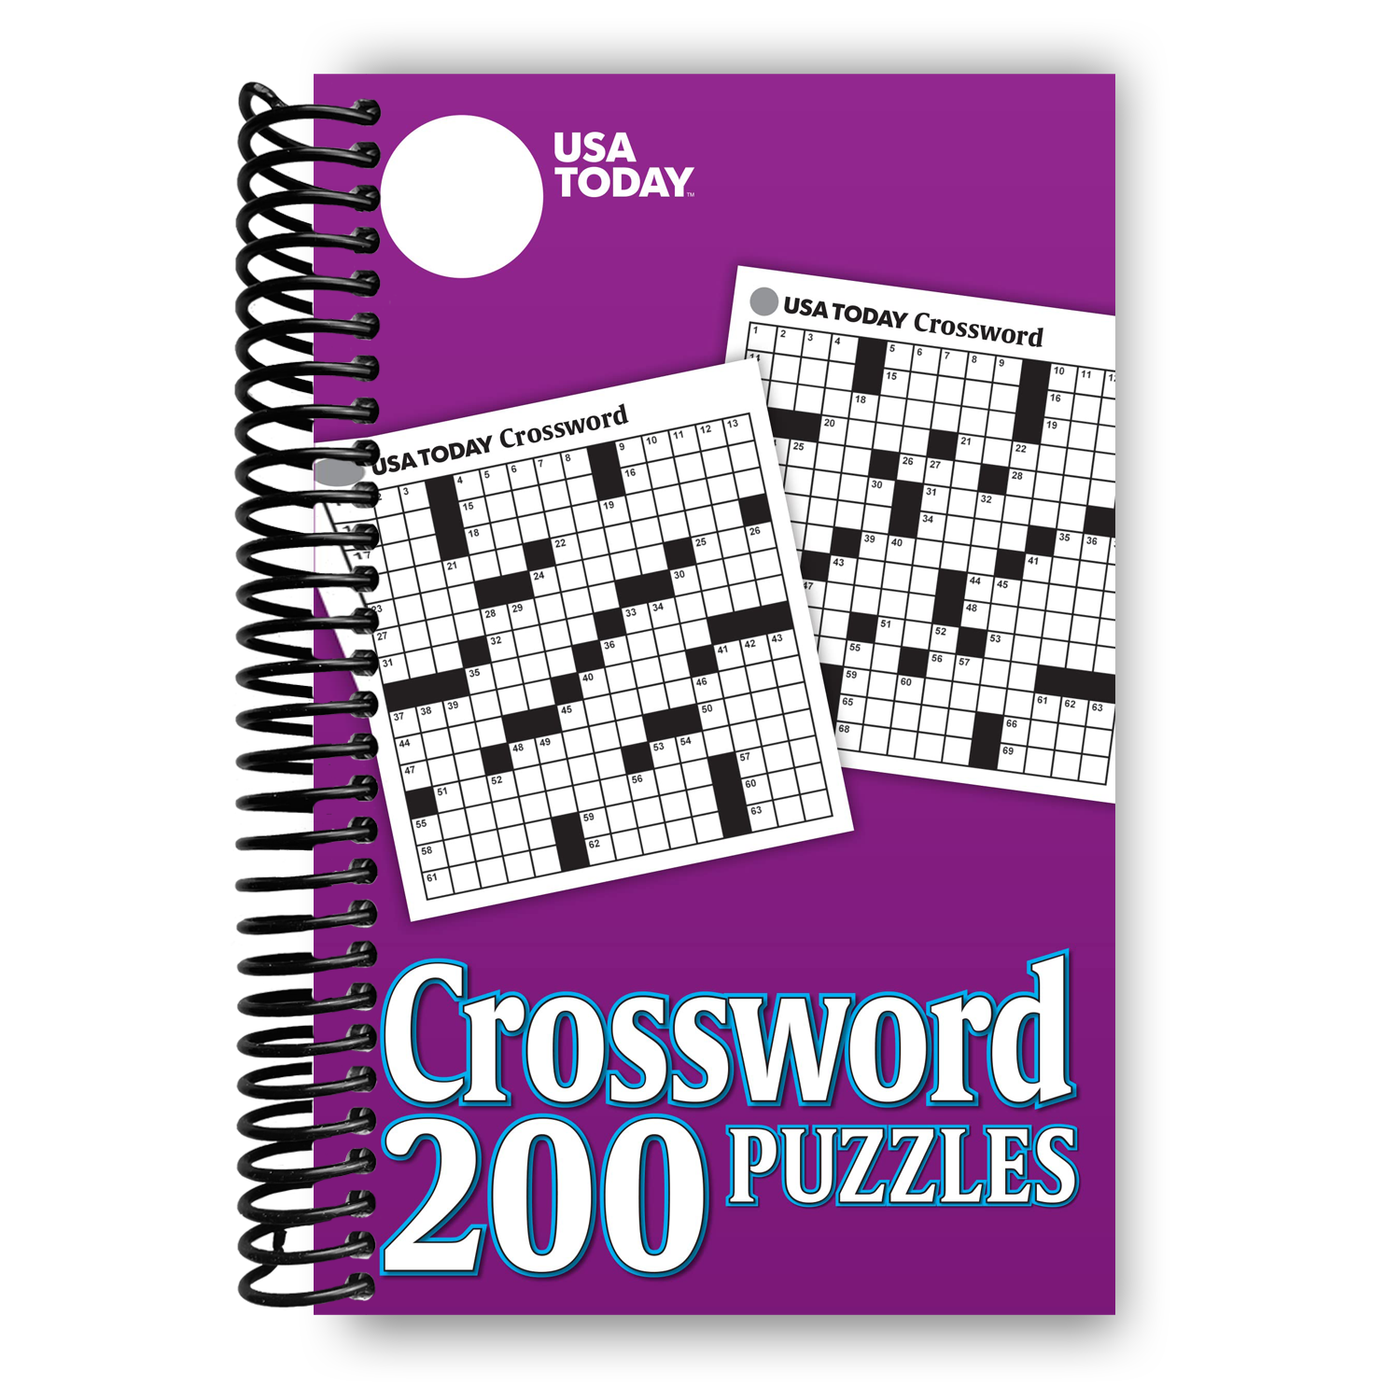 USA TODAY Crossword: 200 Puzzles from The Nation's No. 1 Newspaper (Volume 2) (Spiral Bound)